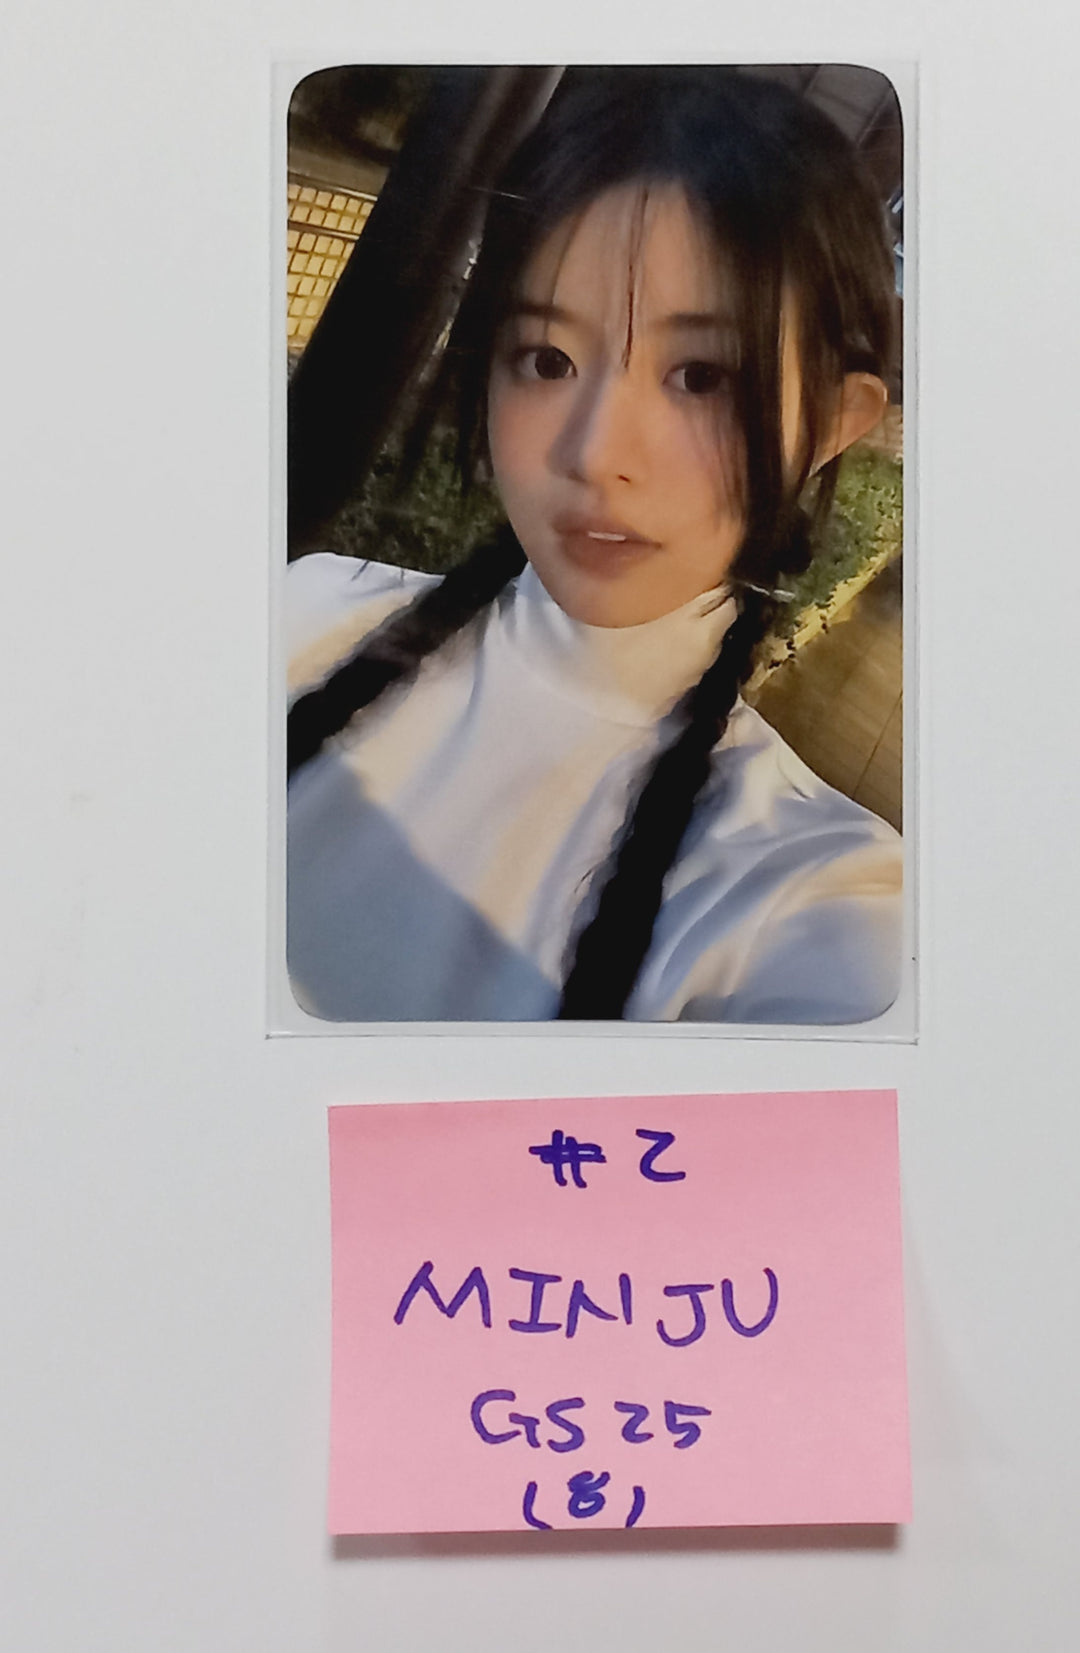 ILLIT "SUPER REAL ME" - GS 25 Event Photocard [24.4.1]